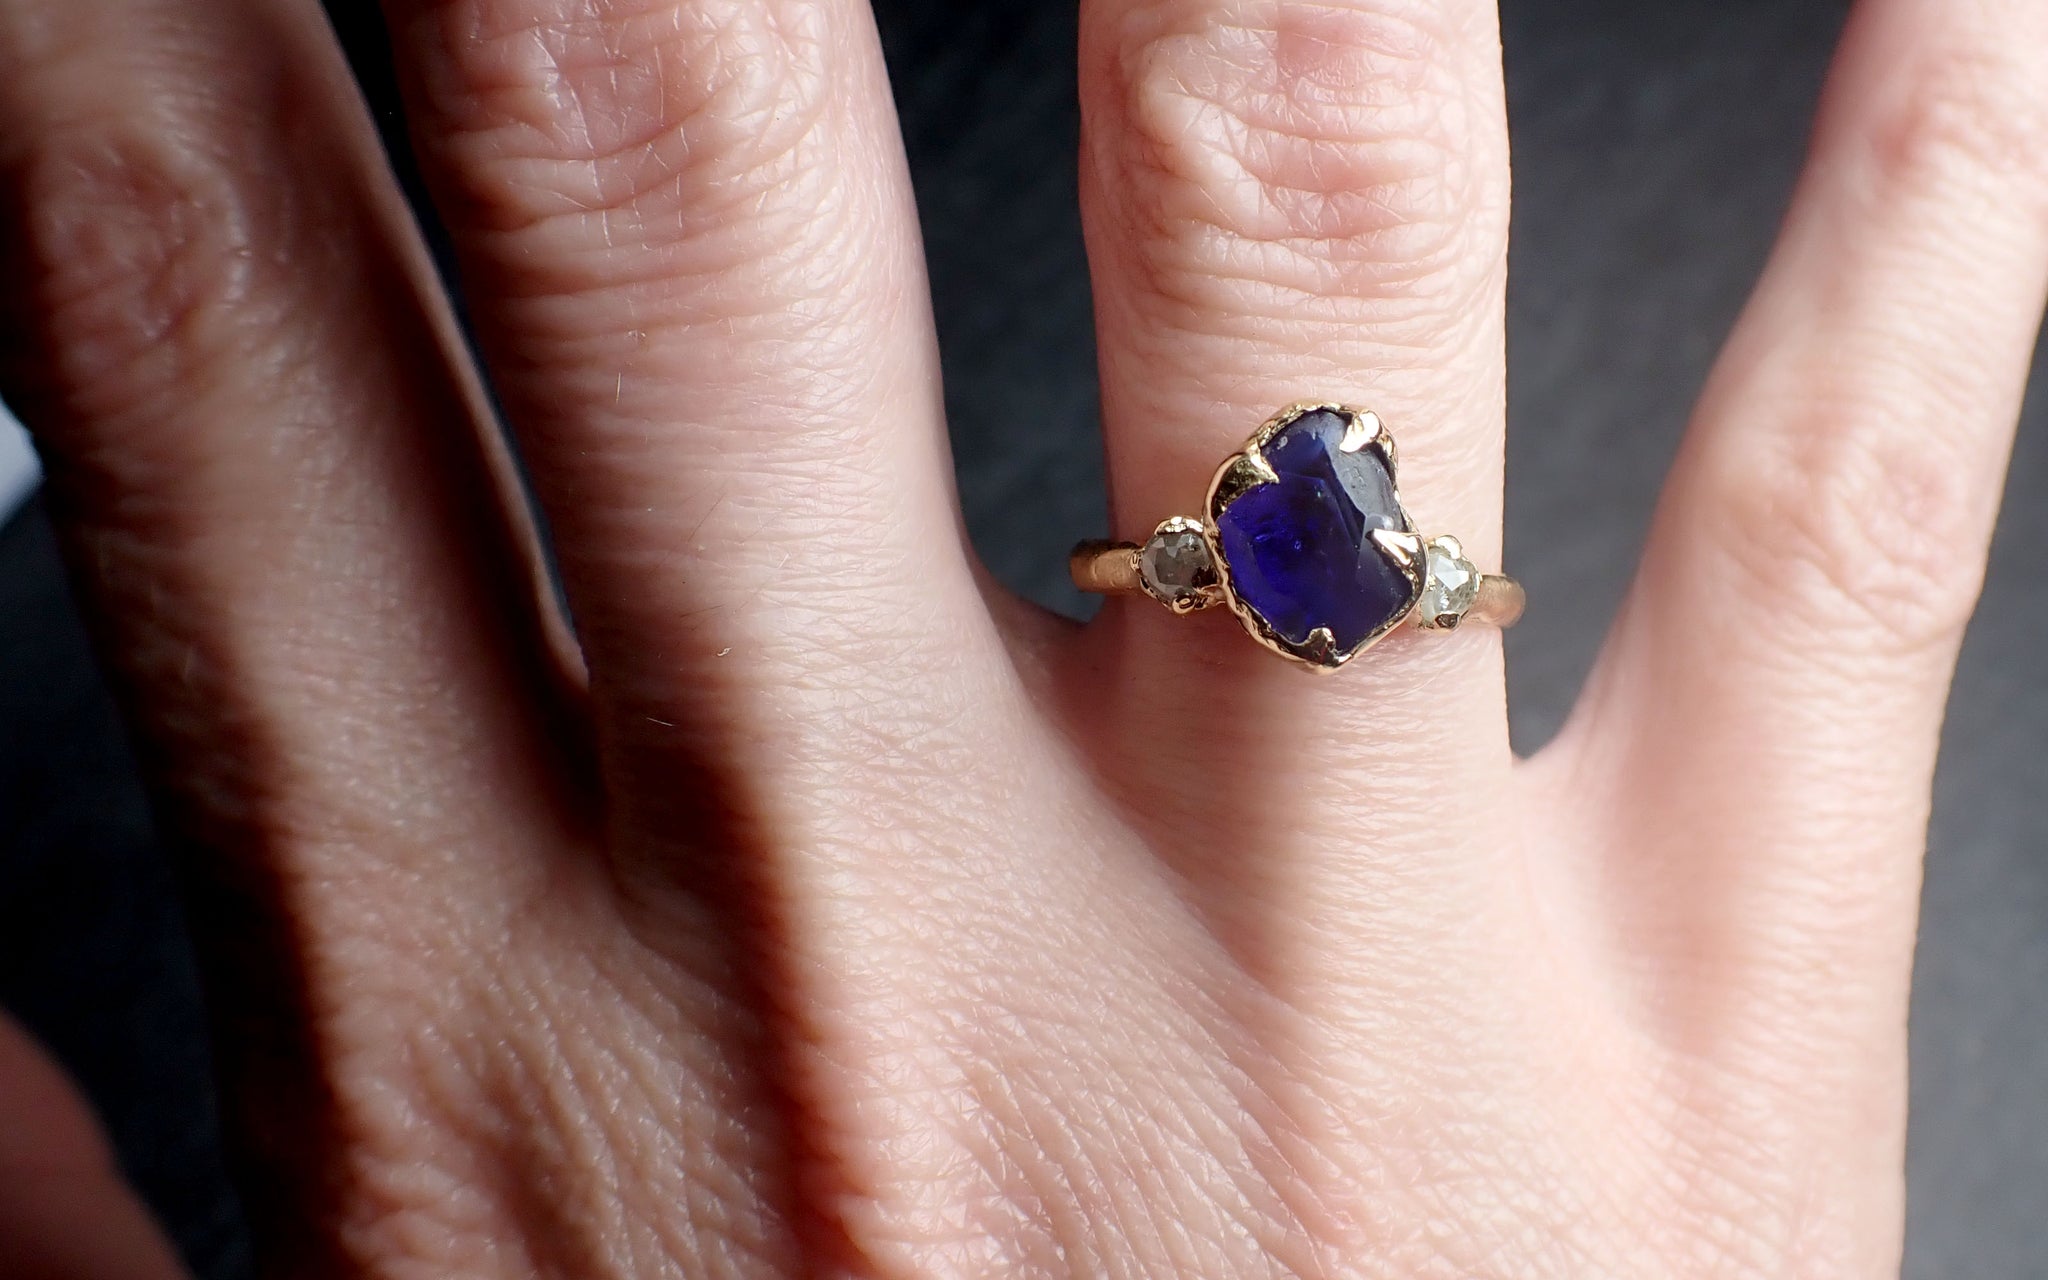 Partially Faceted blue Sapphire side diamonds Multi stone 18k Yellow Gold Engagement Ring Wedding Ring Custom Gemstone Ring 2517